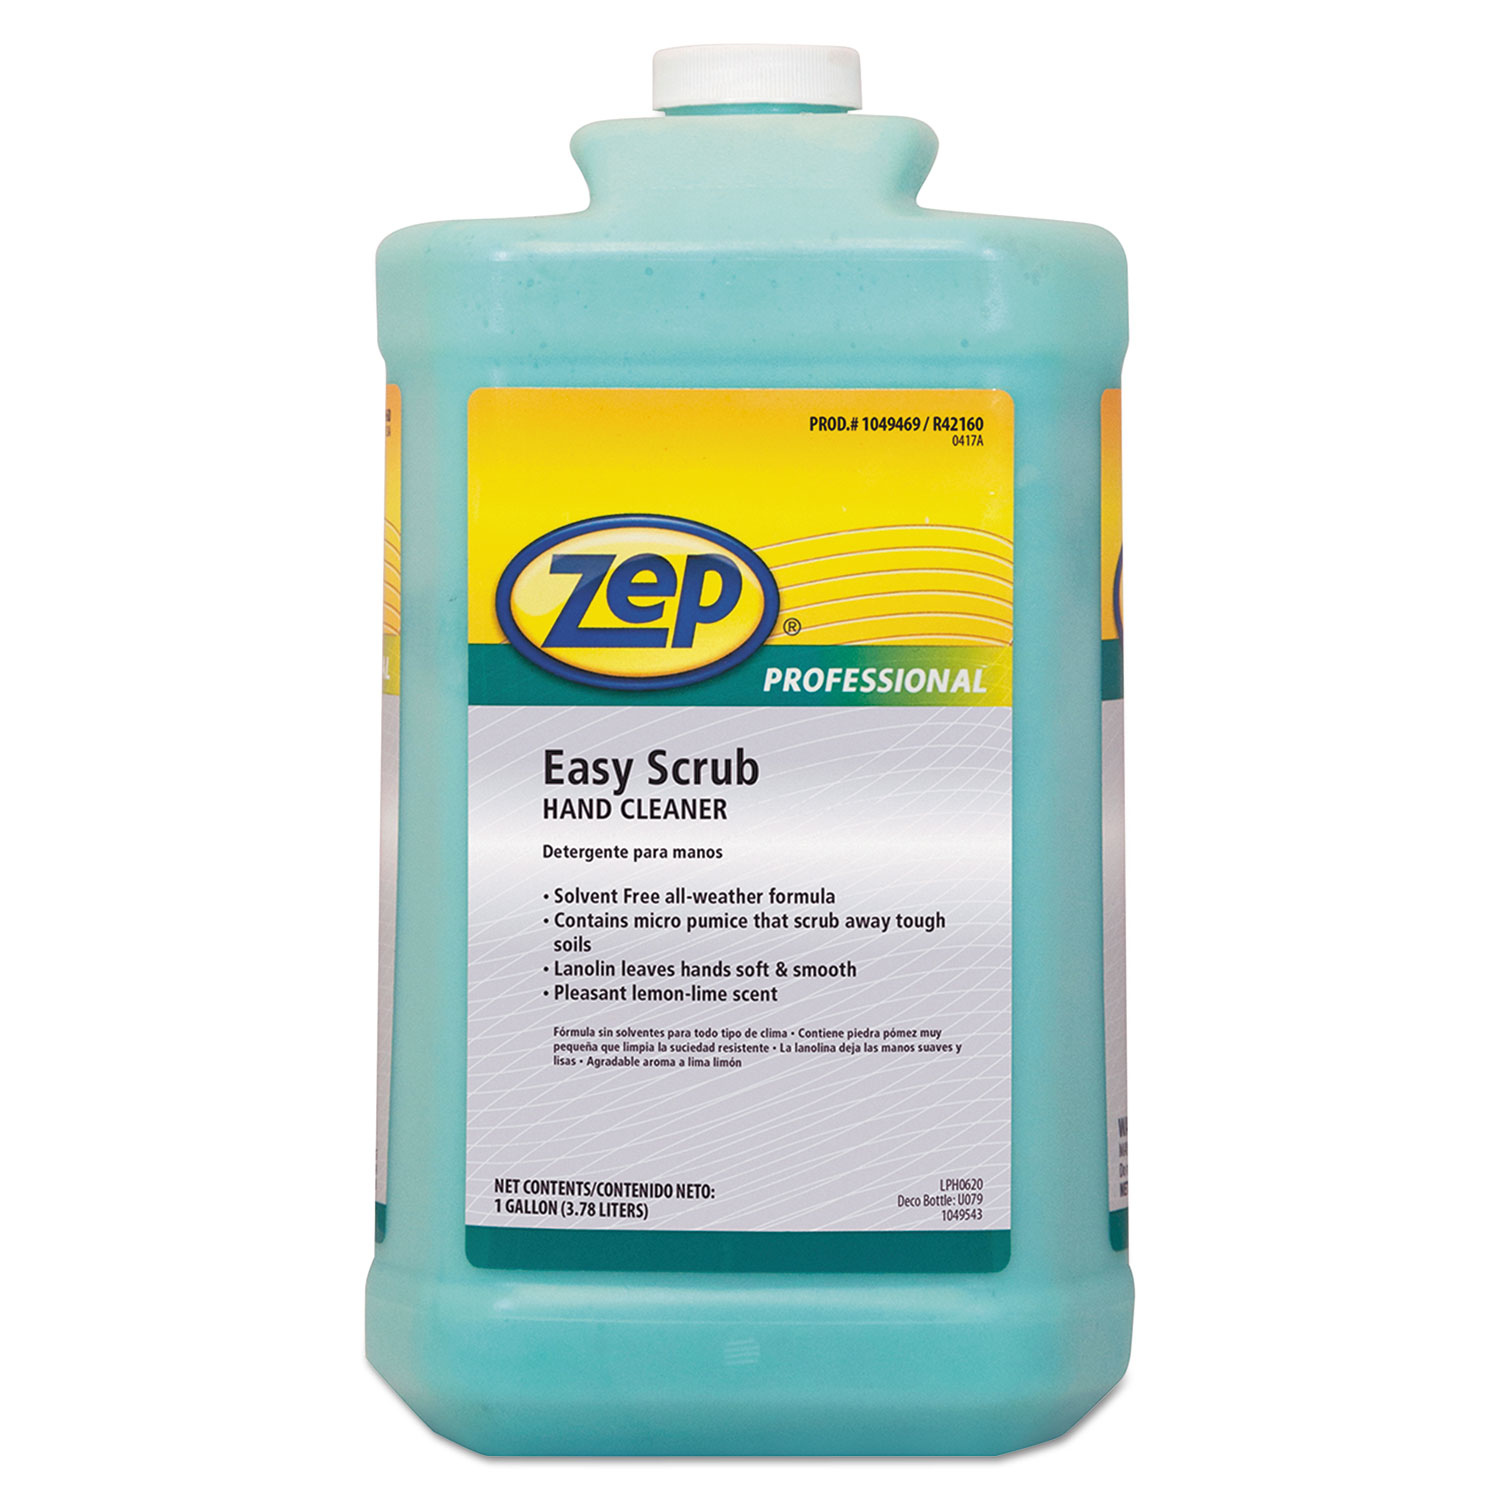  Zep Professional 1049470 Industrial Hand Cleaner, Easy Scrub, 1 gal Bottle with Pump, 4/Carton (ZPP1049470) 